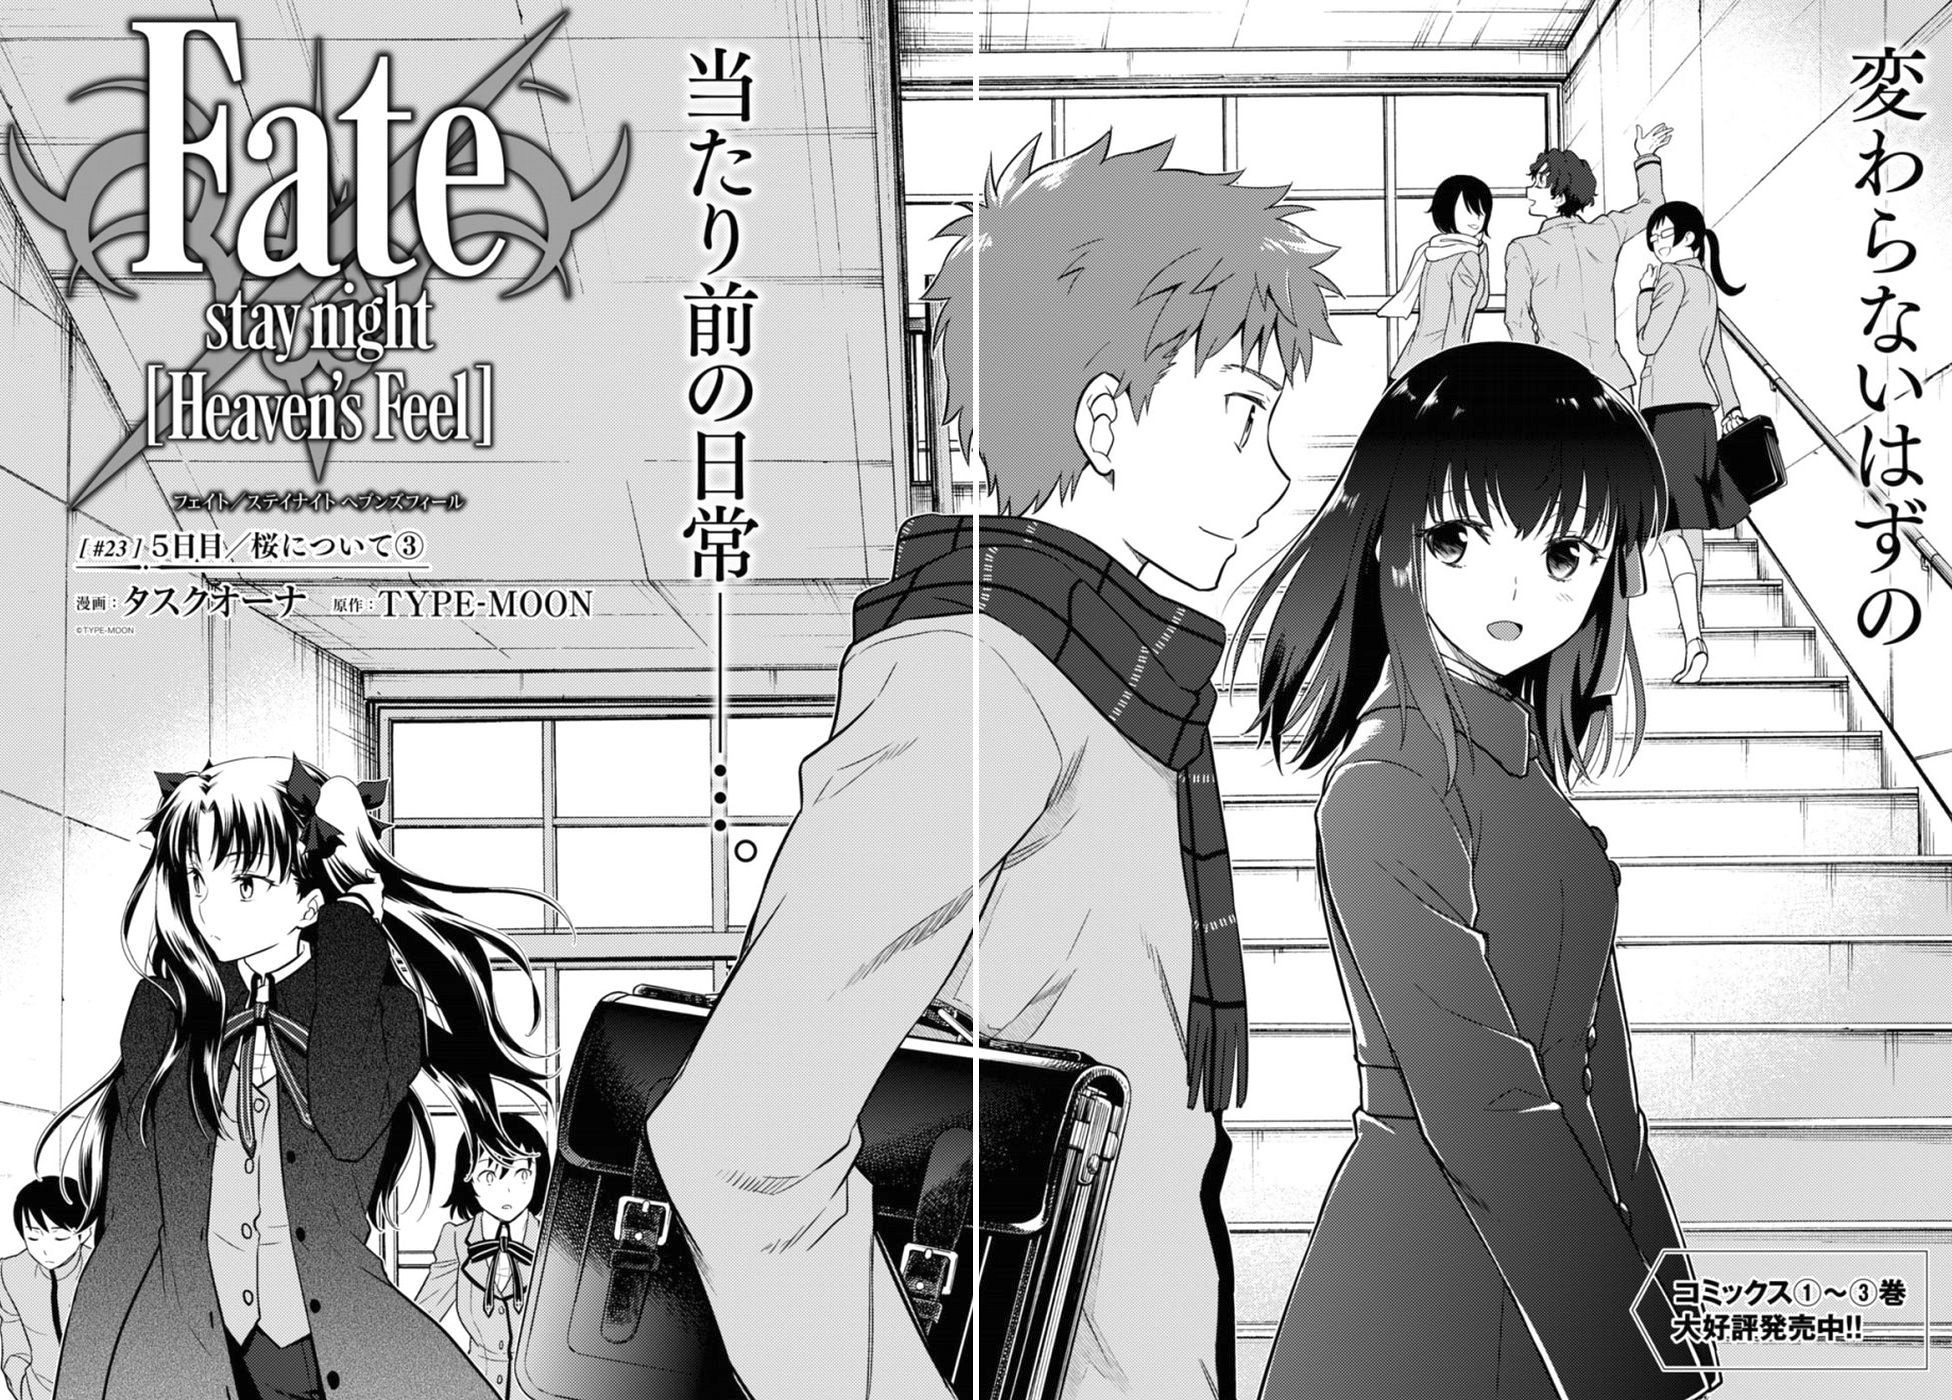 Fate/Stay night Heaven's Feel - Chapter 23 - Page 3